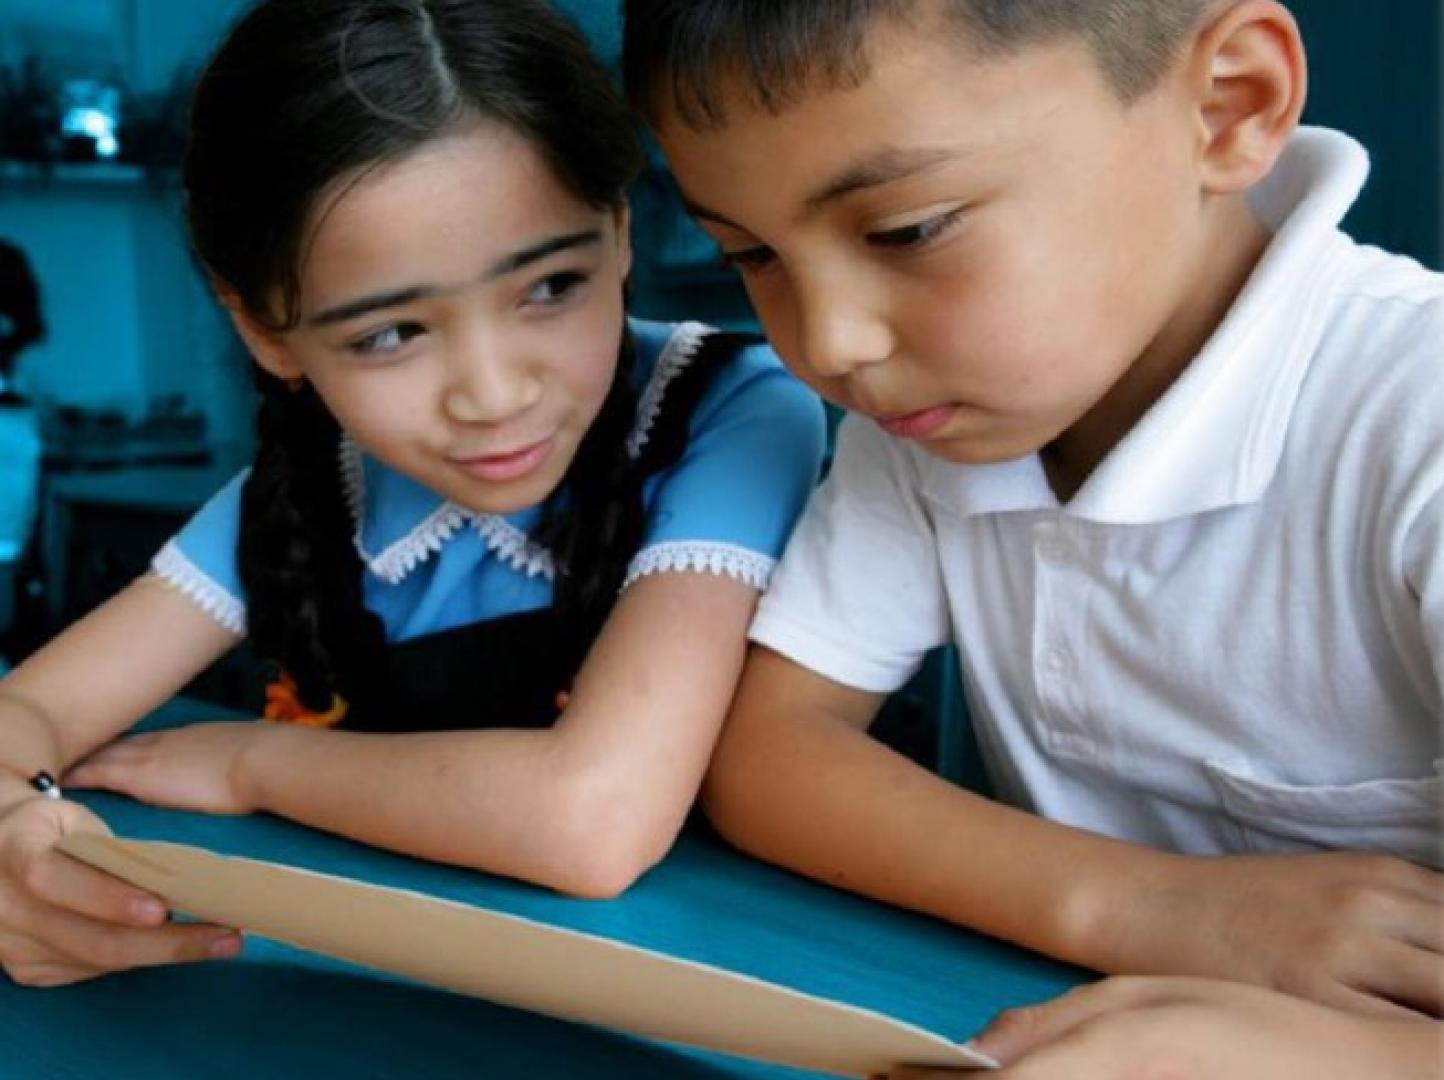 A boy and a girl sitting in a classroom and reading together